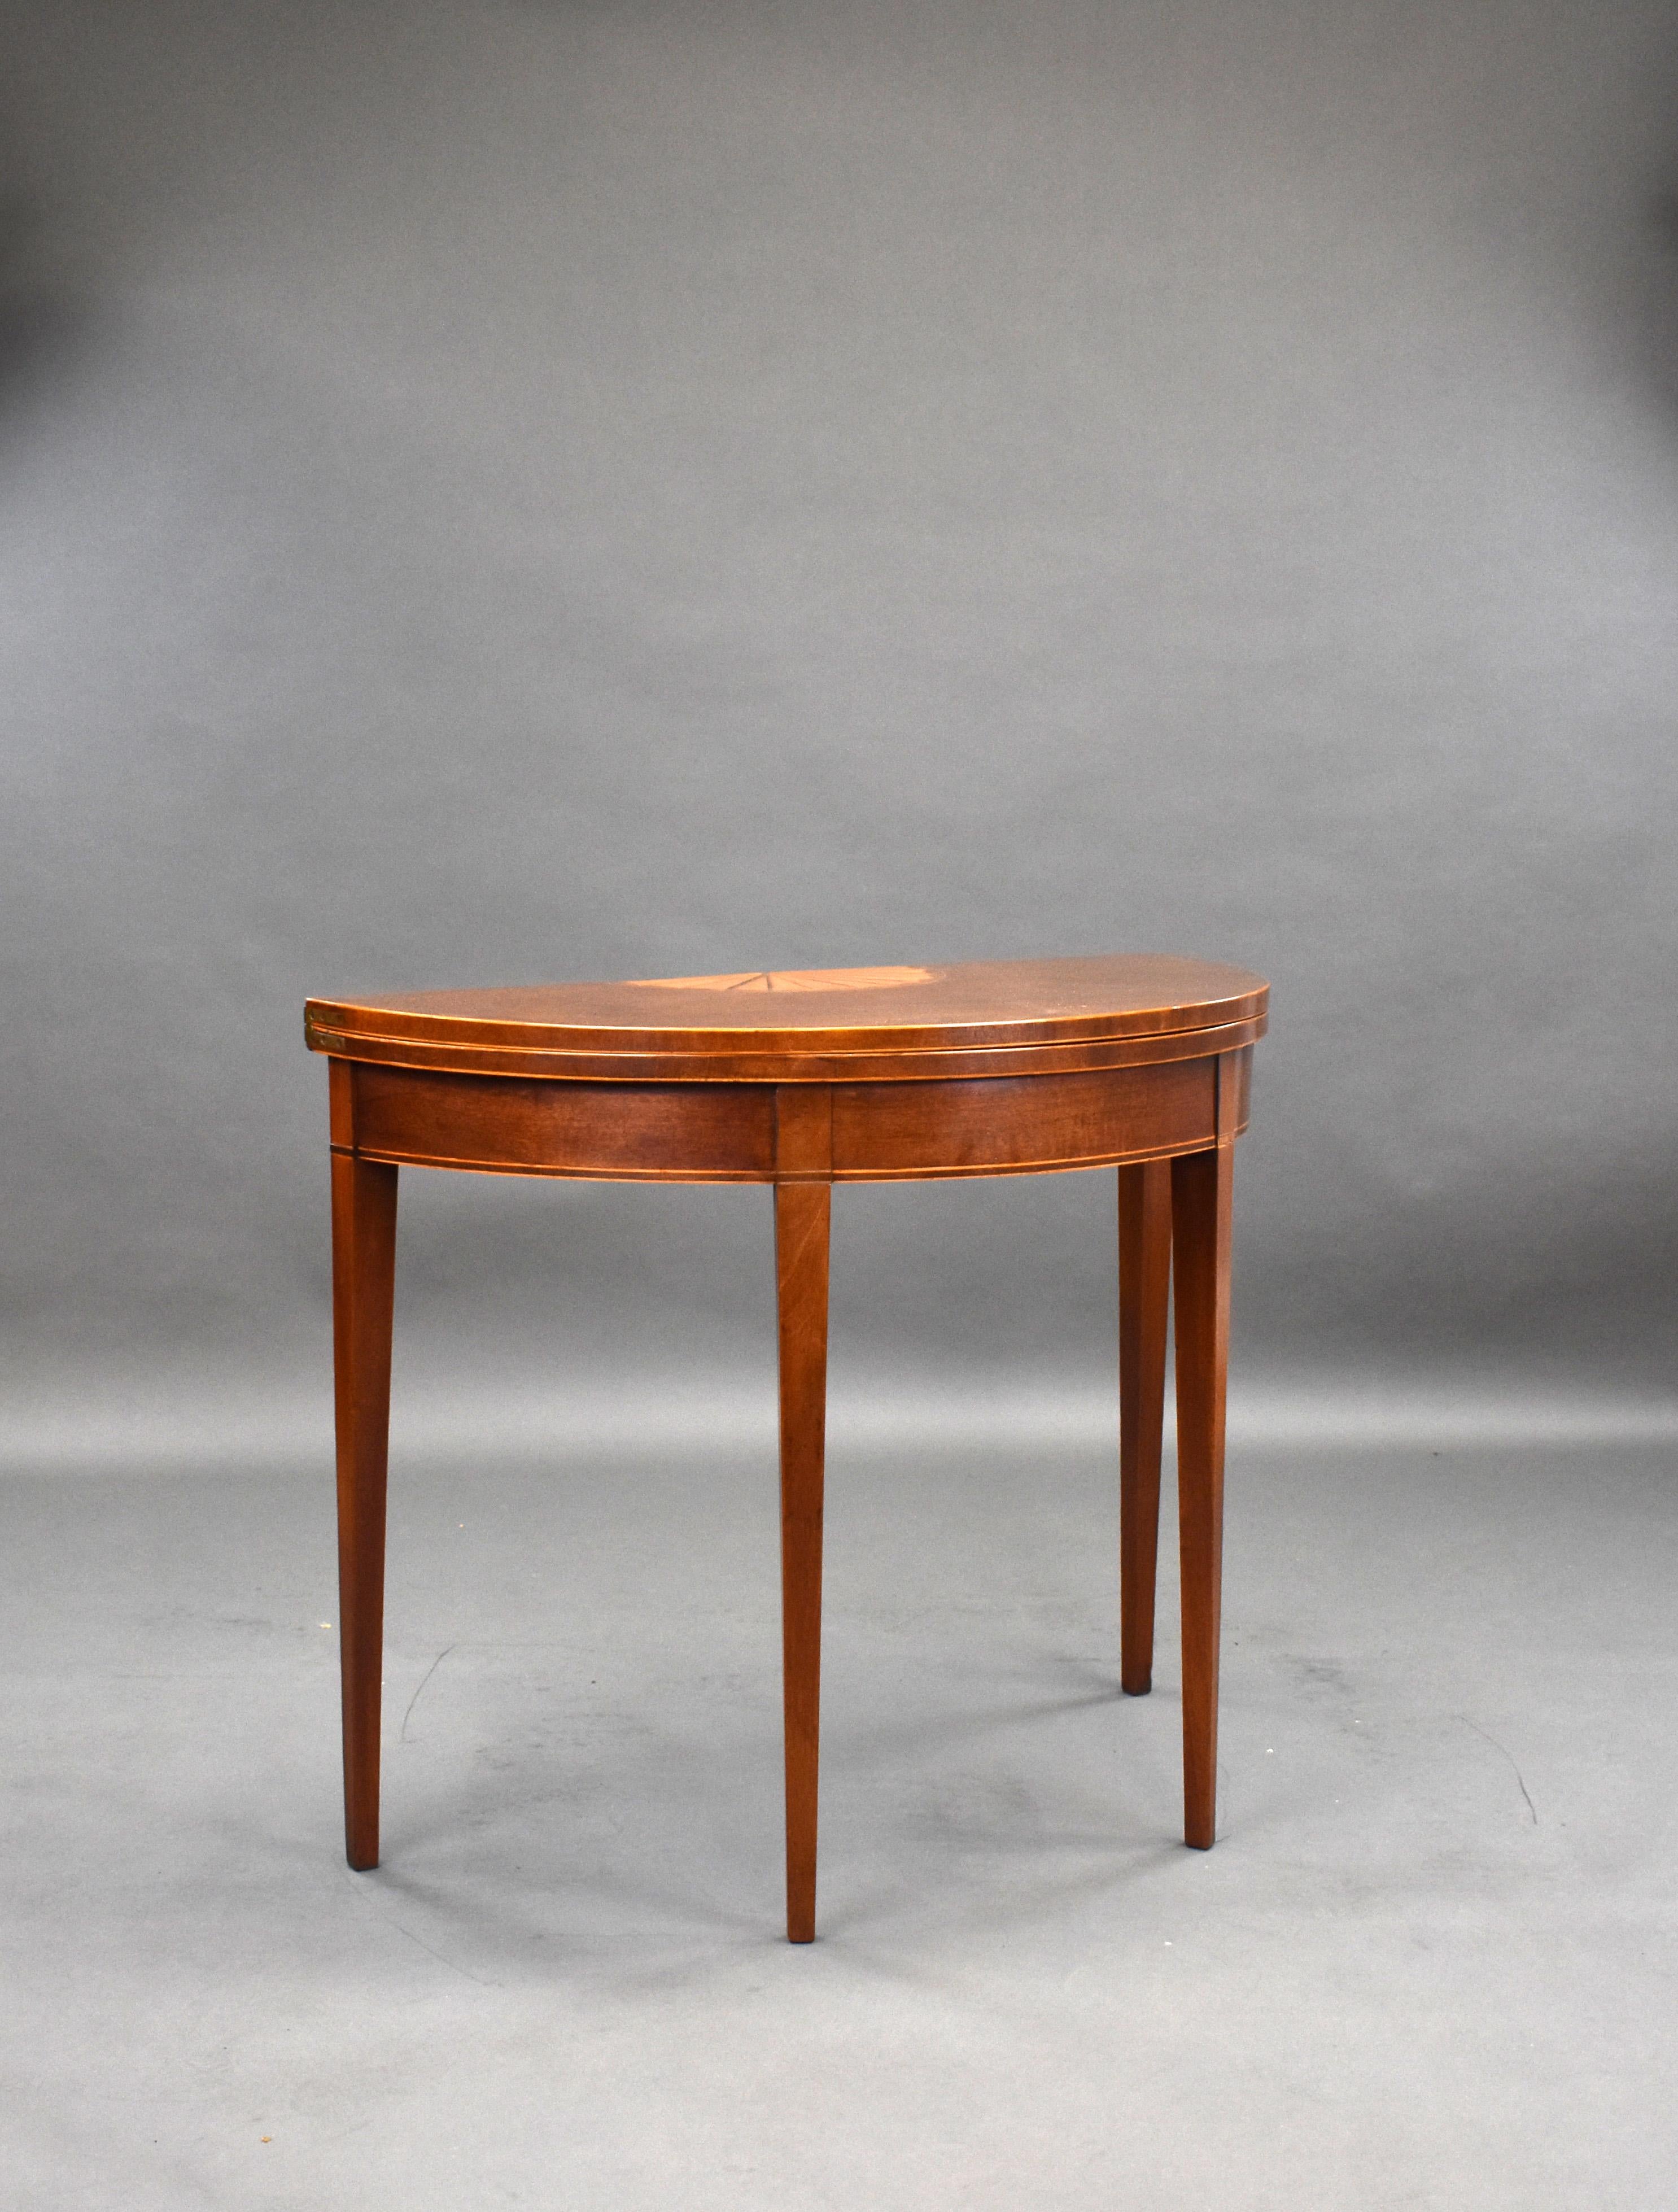 For sale is a George III Mahogany tea table, having a shell inlay to the top, opening out to make a circular table, standing on tapered legs. The card table is in very good condition for its age. 

Measures: Width: 92cm Depth: 46cm Height: 75.5cm.